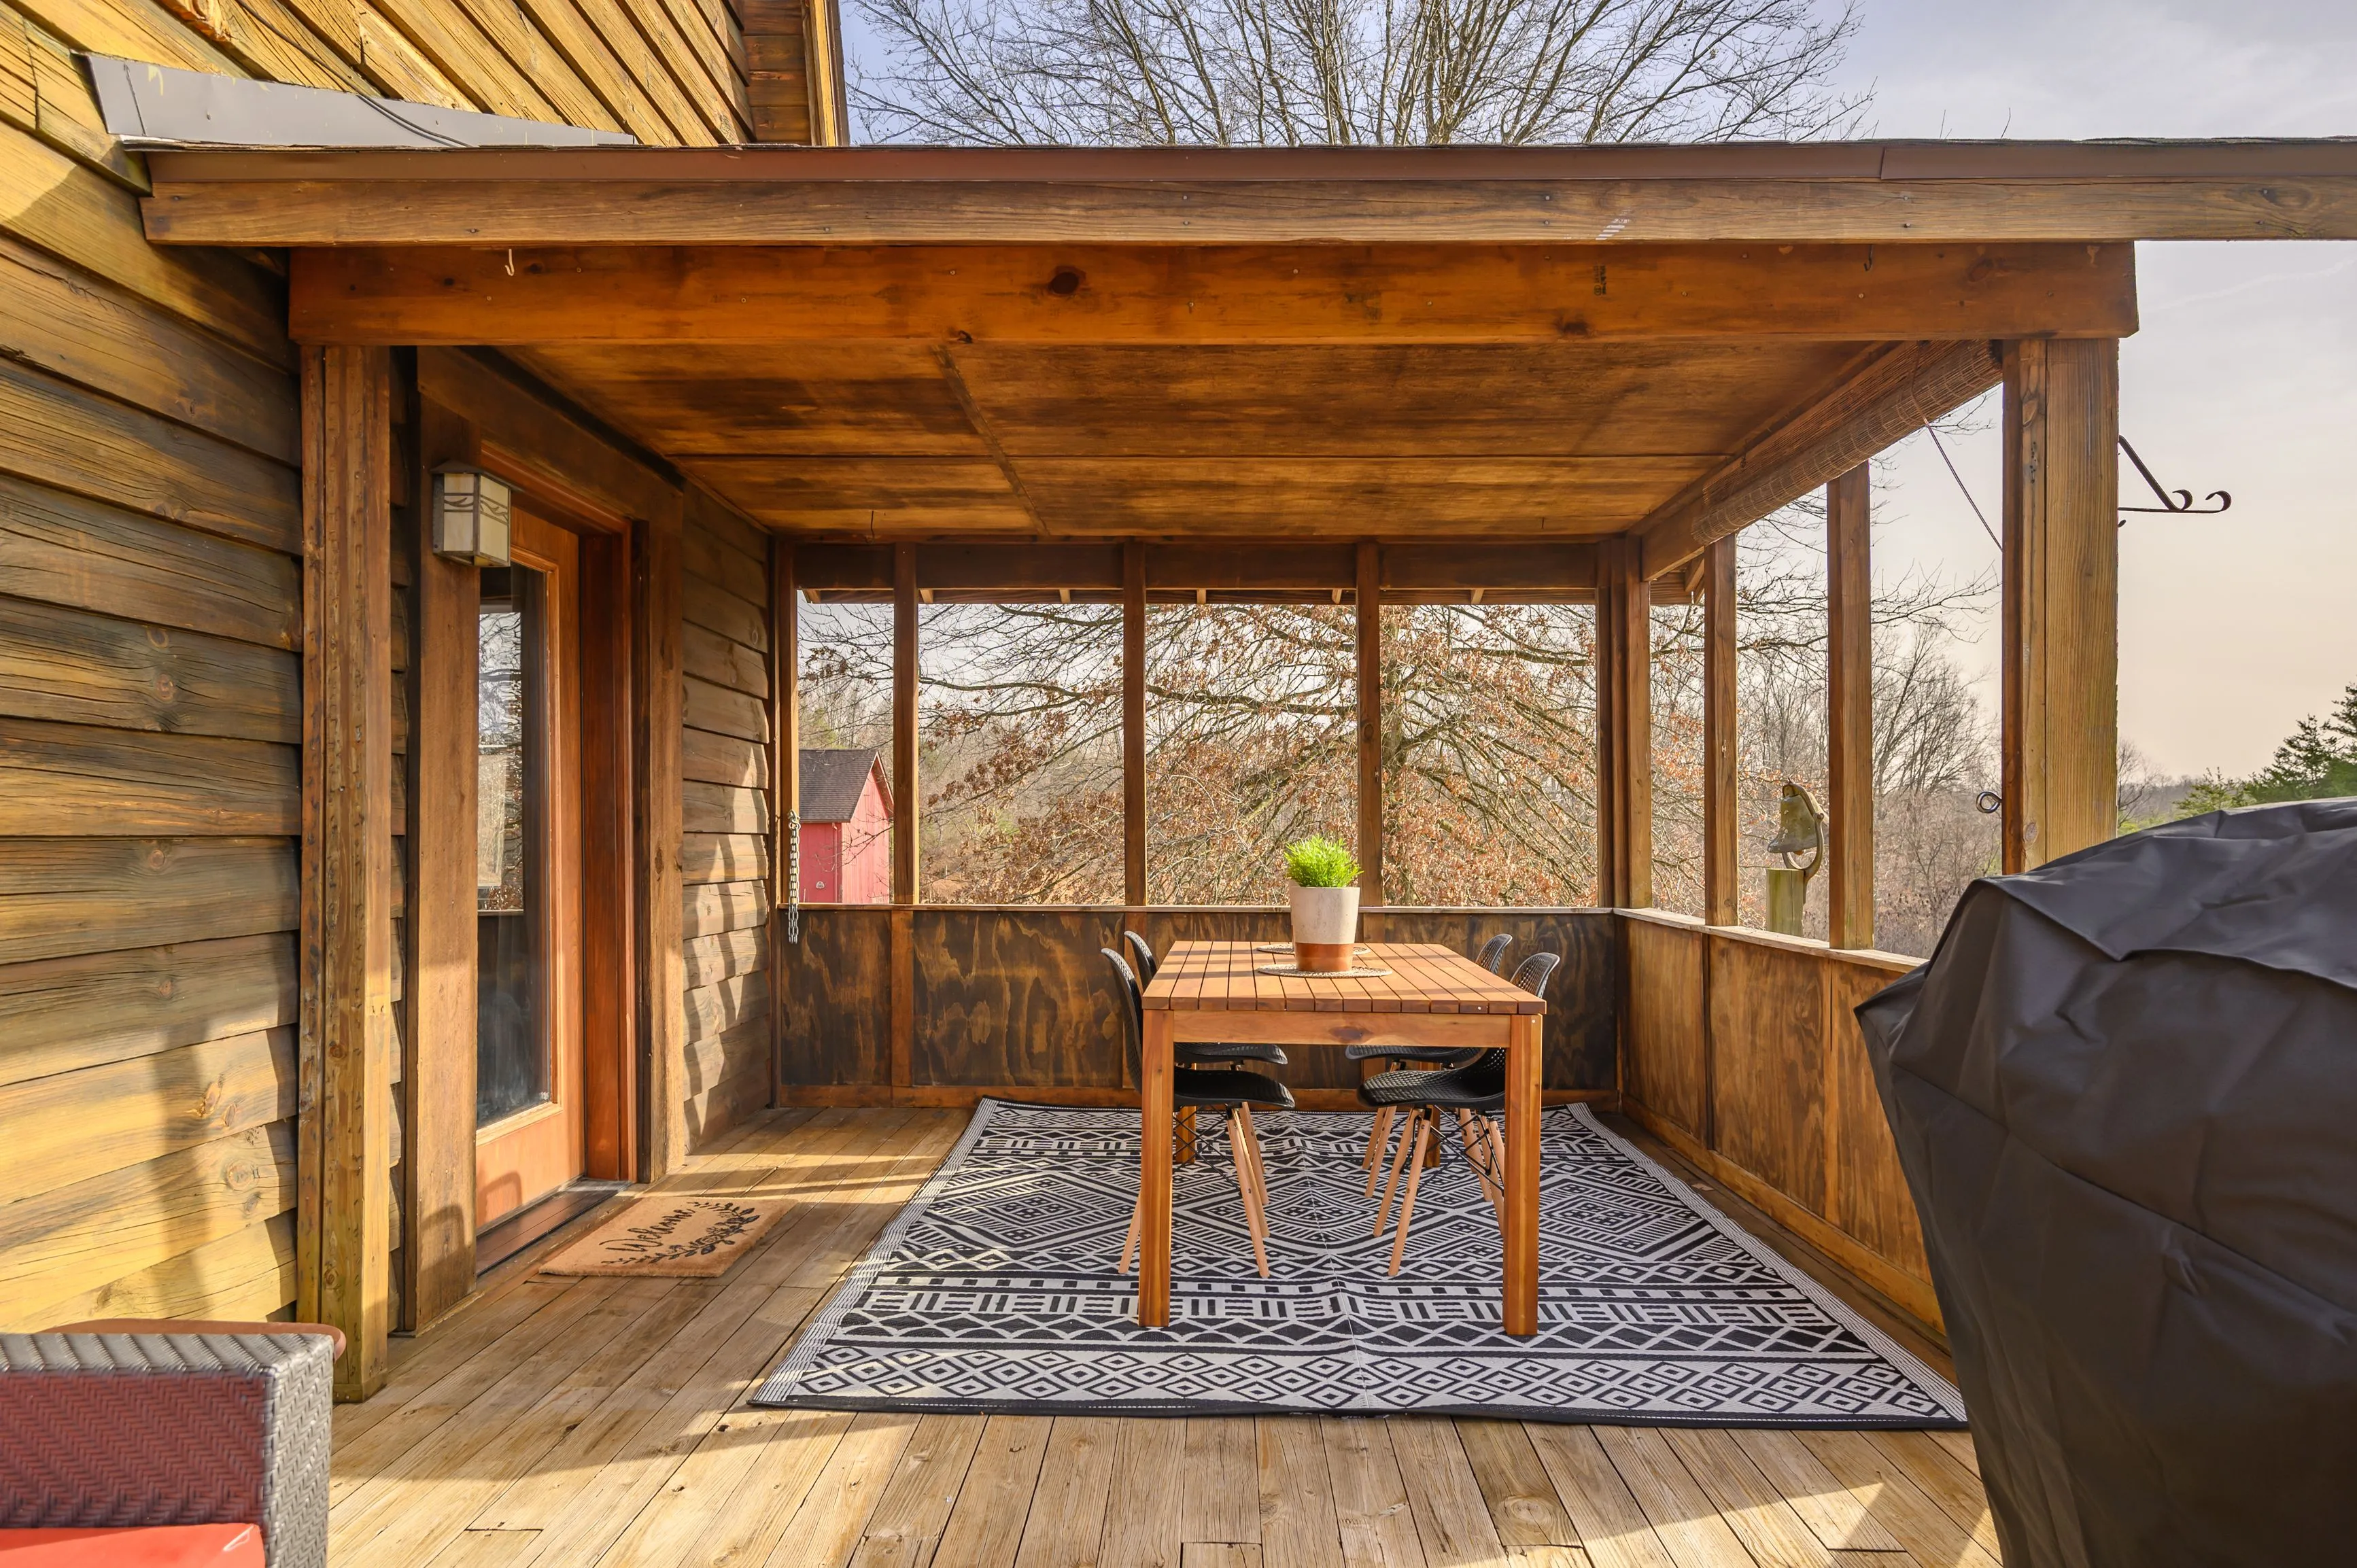 Cozy wooden screened porch with a dining table and chairs, patterned rug, and forest view.